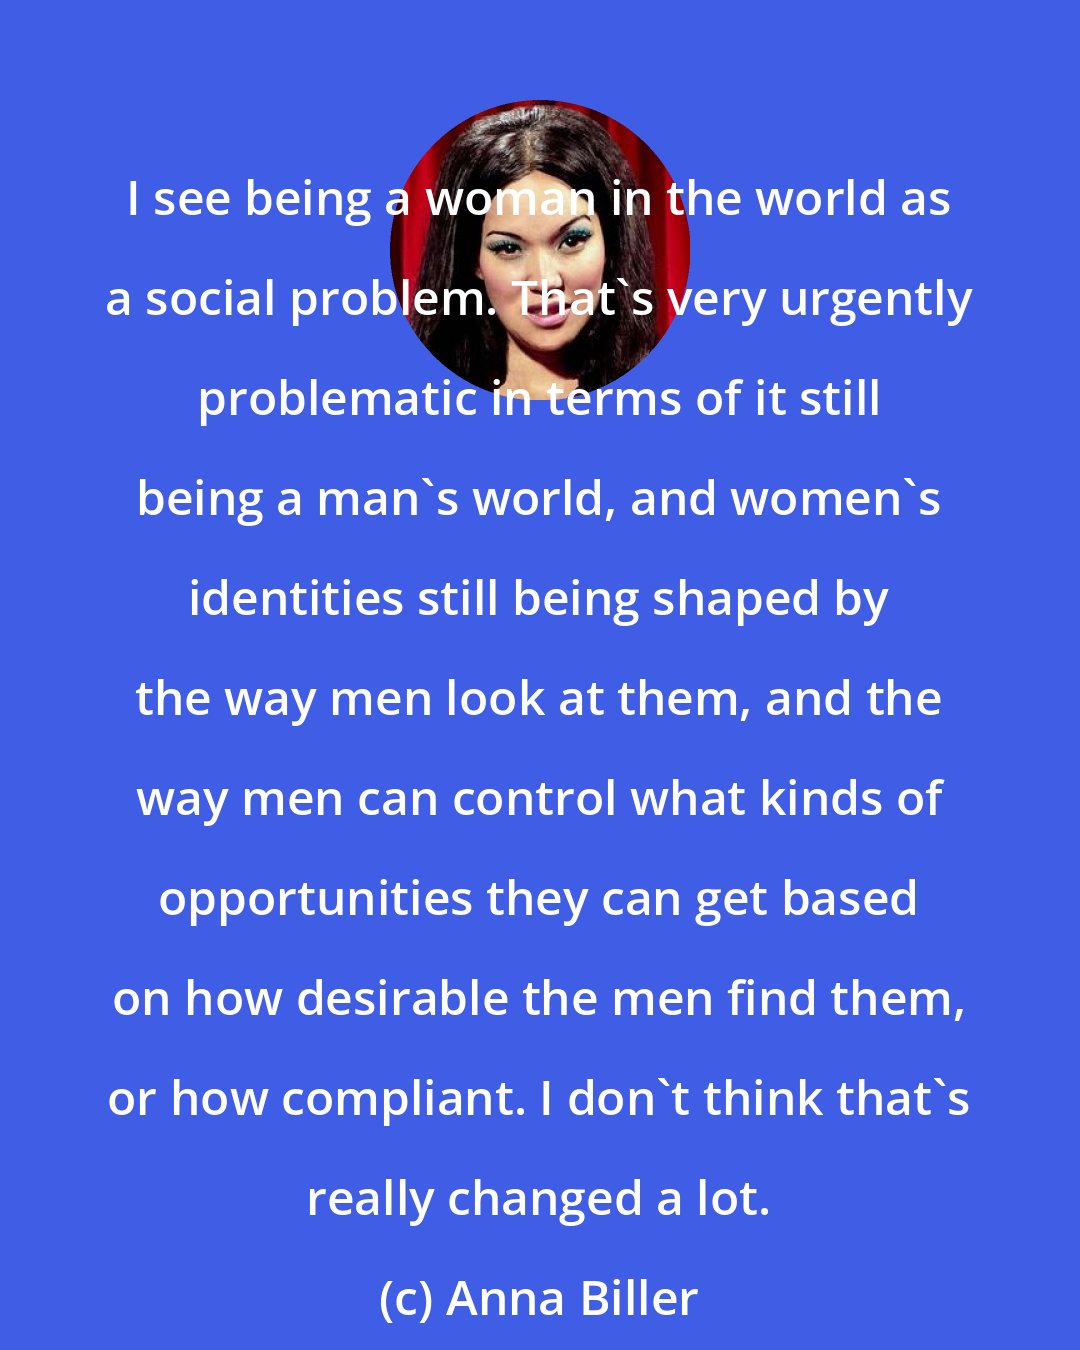 Anna Biller: I see being a woman in the world as a social problem. That's very urgently problematic in terms of it still being a man's world, and women's identities still being shaped by the way men look at them, and the way men can control what kinds of opportunities they can get based on how desirable the men find them, or how compliant. I don't think that's really changed a lot.